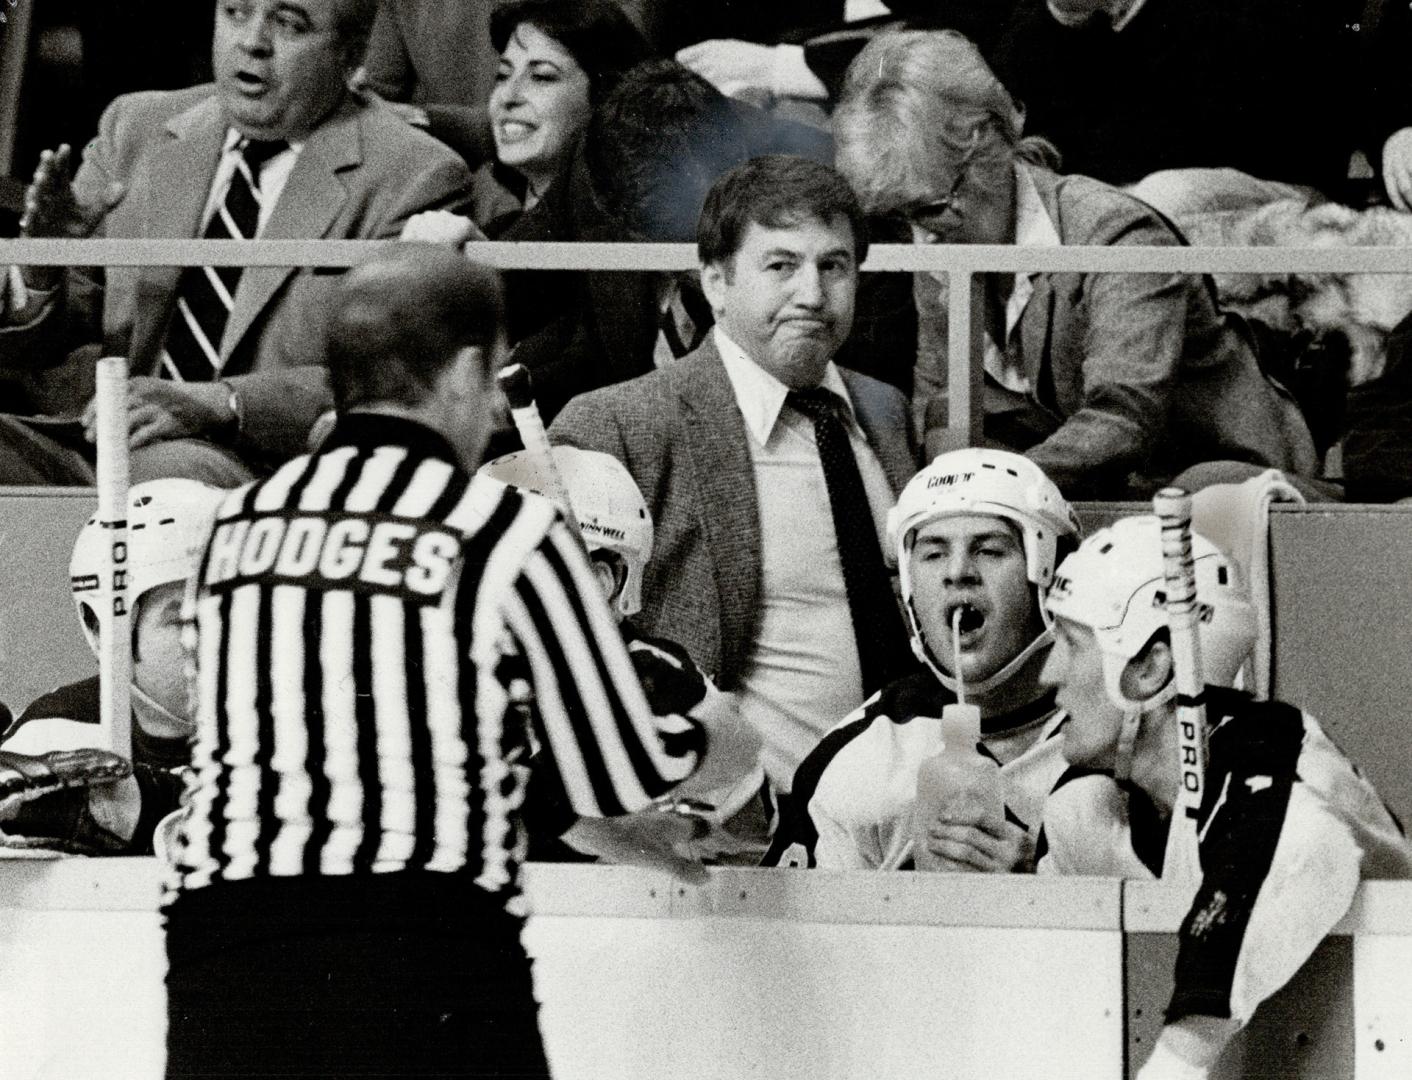 Taste of glum, While linesman Bob Hodges dumps some extraneous litter into the Leaf bench area and defencemen Barry Melrose and Borje Salming quaff fr(...)